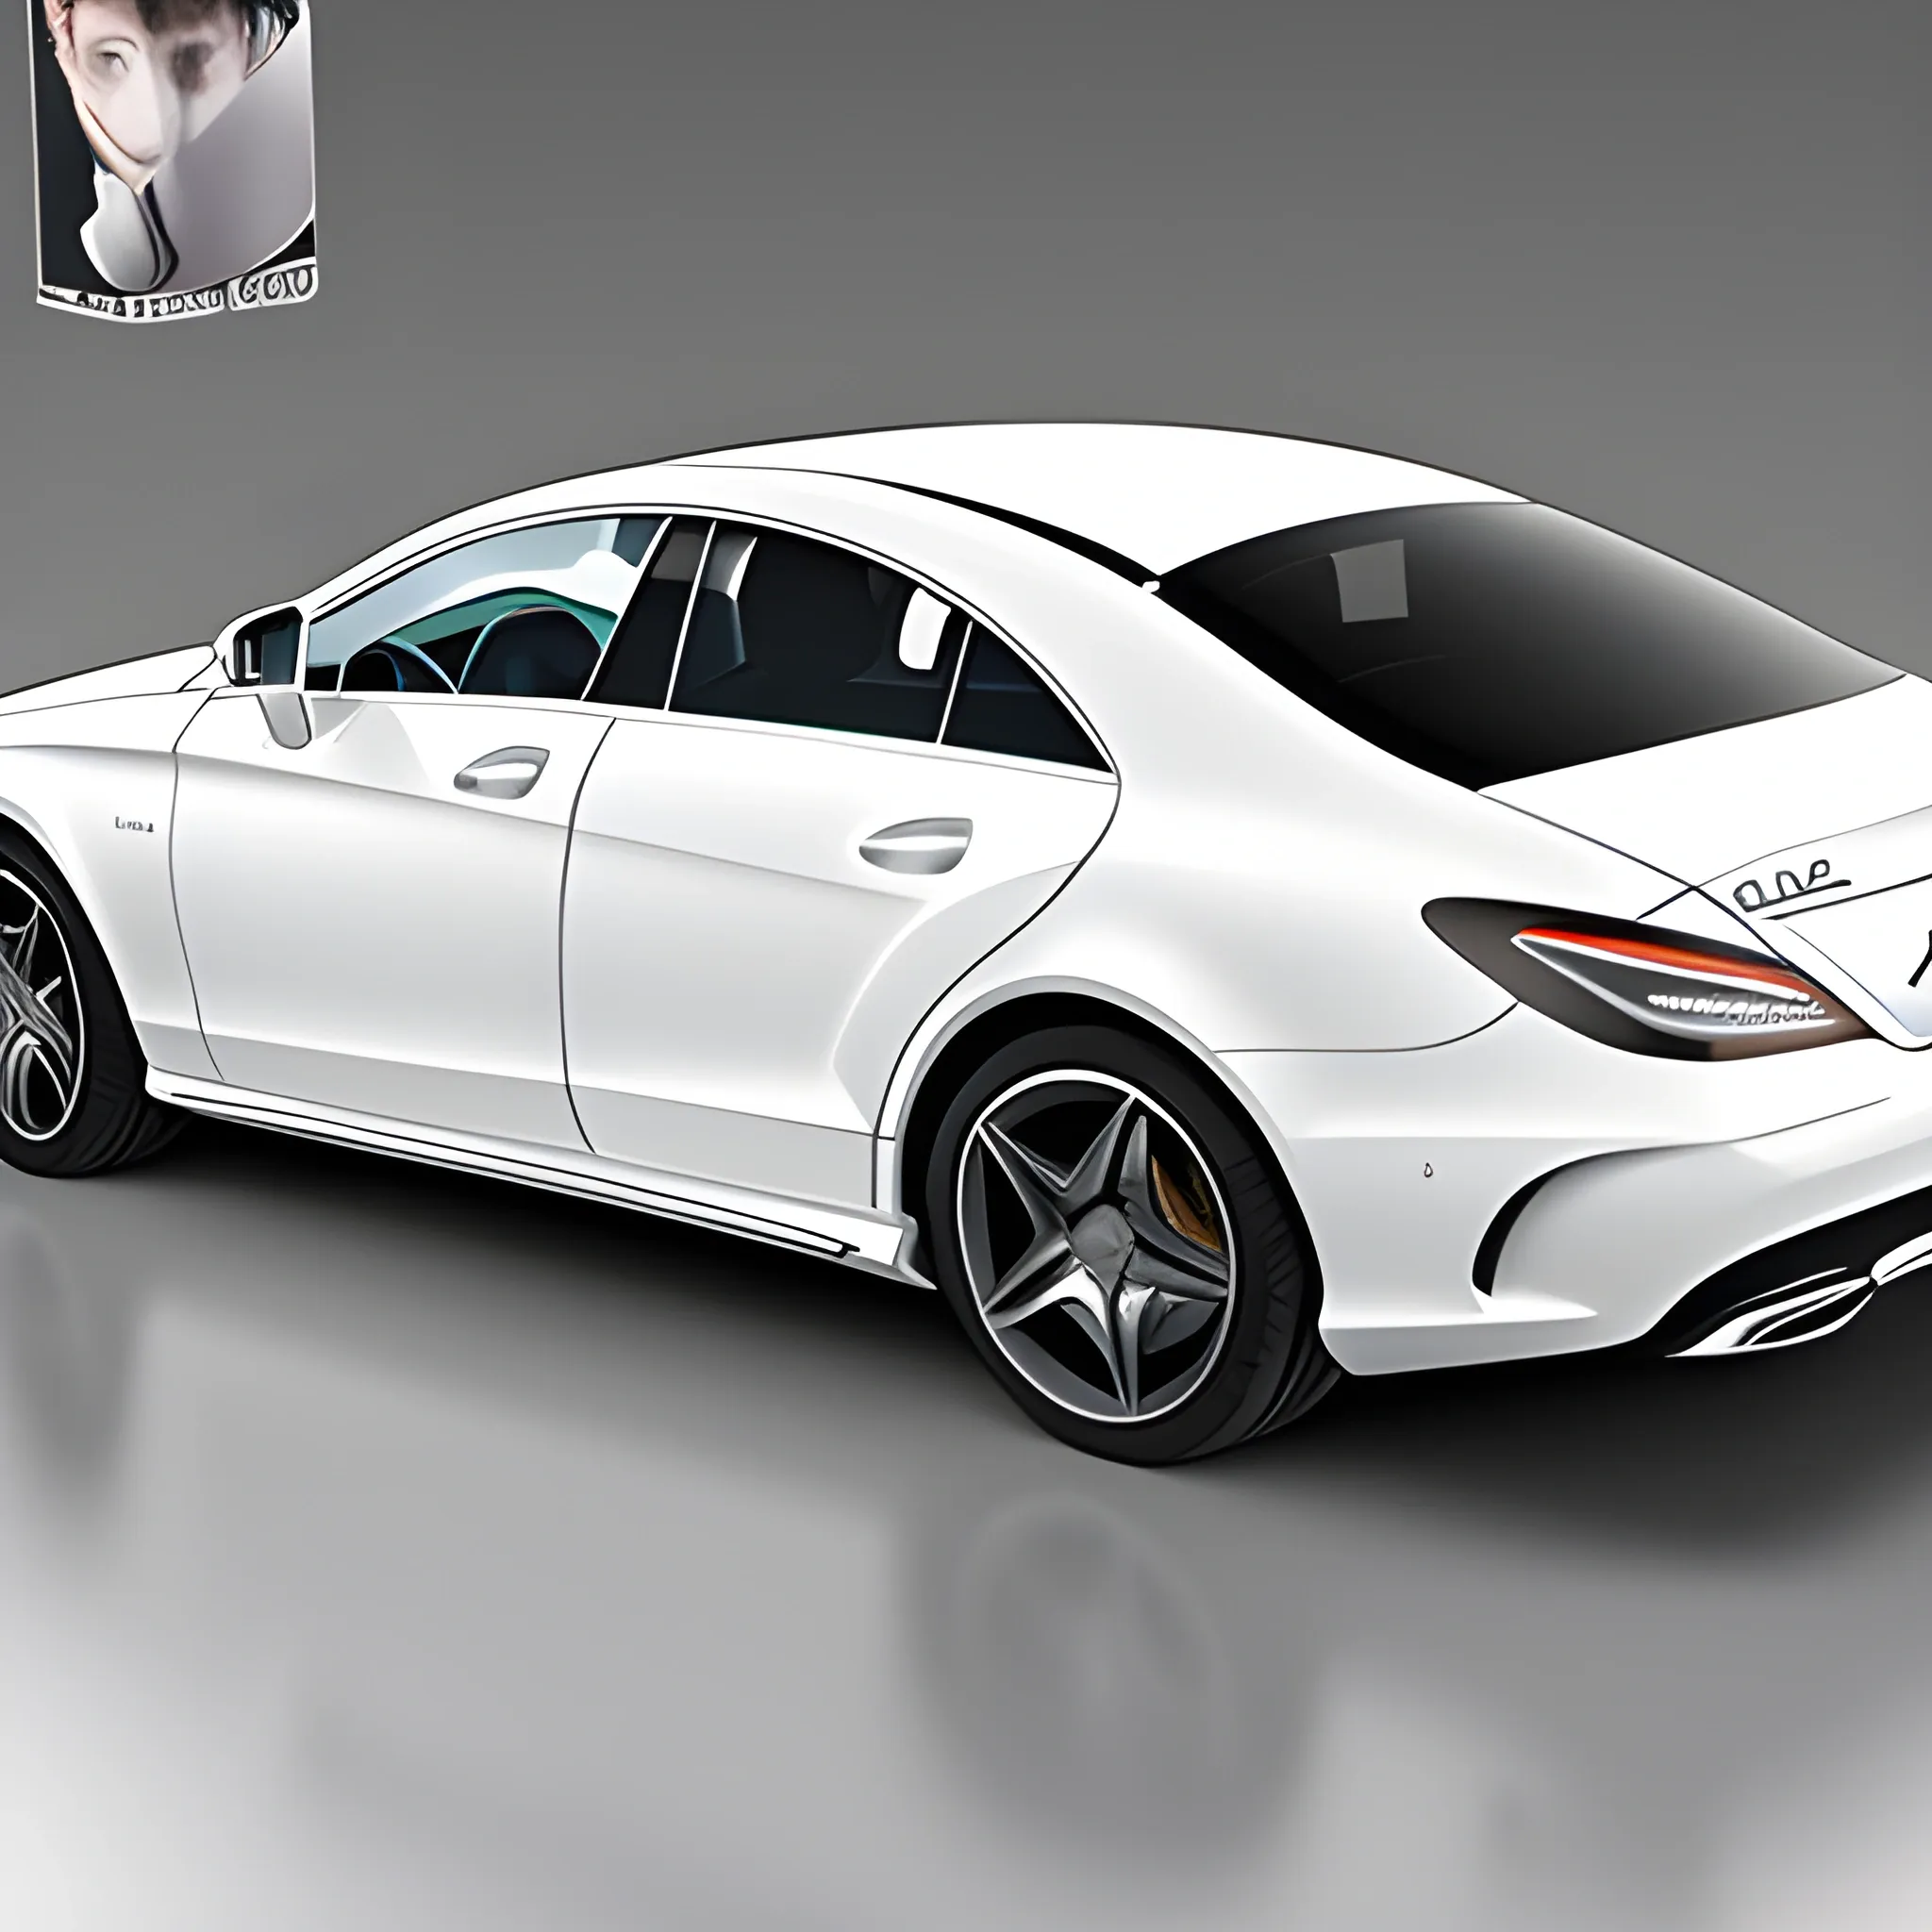 A white Mercedes Benz CLS w218 from the back with no background, 
Cartoon, 3D